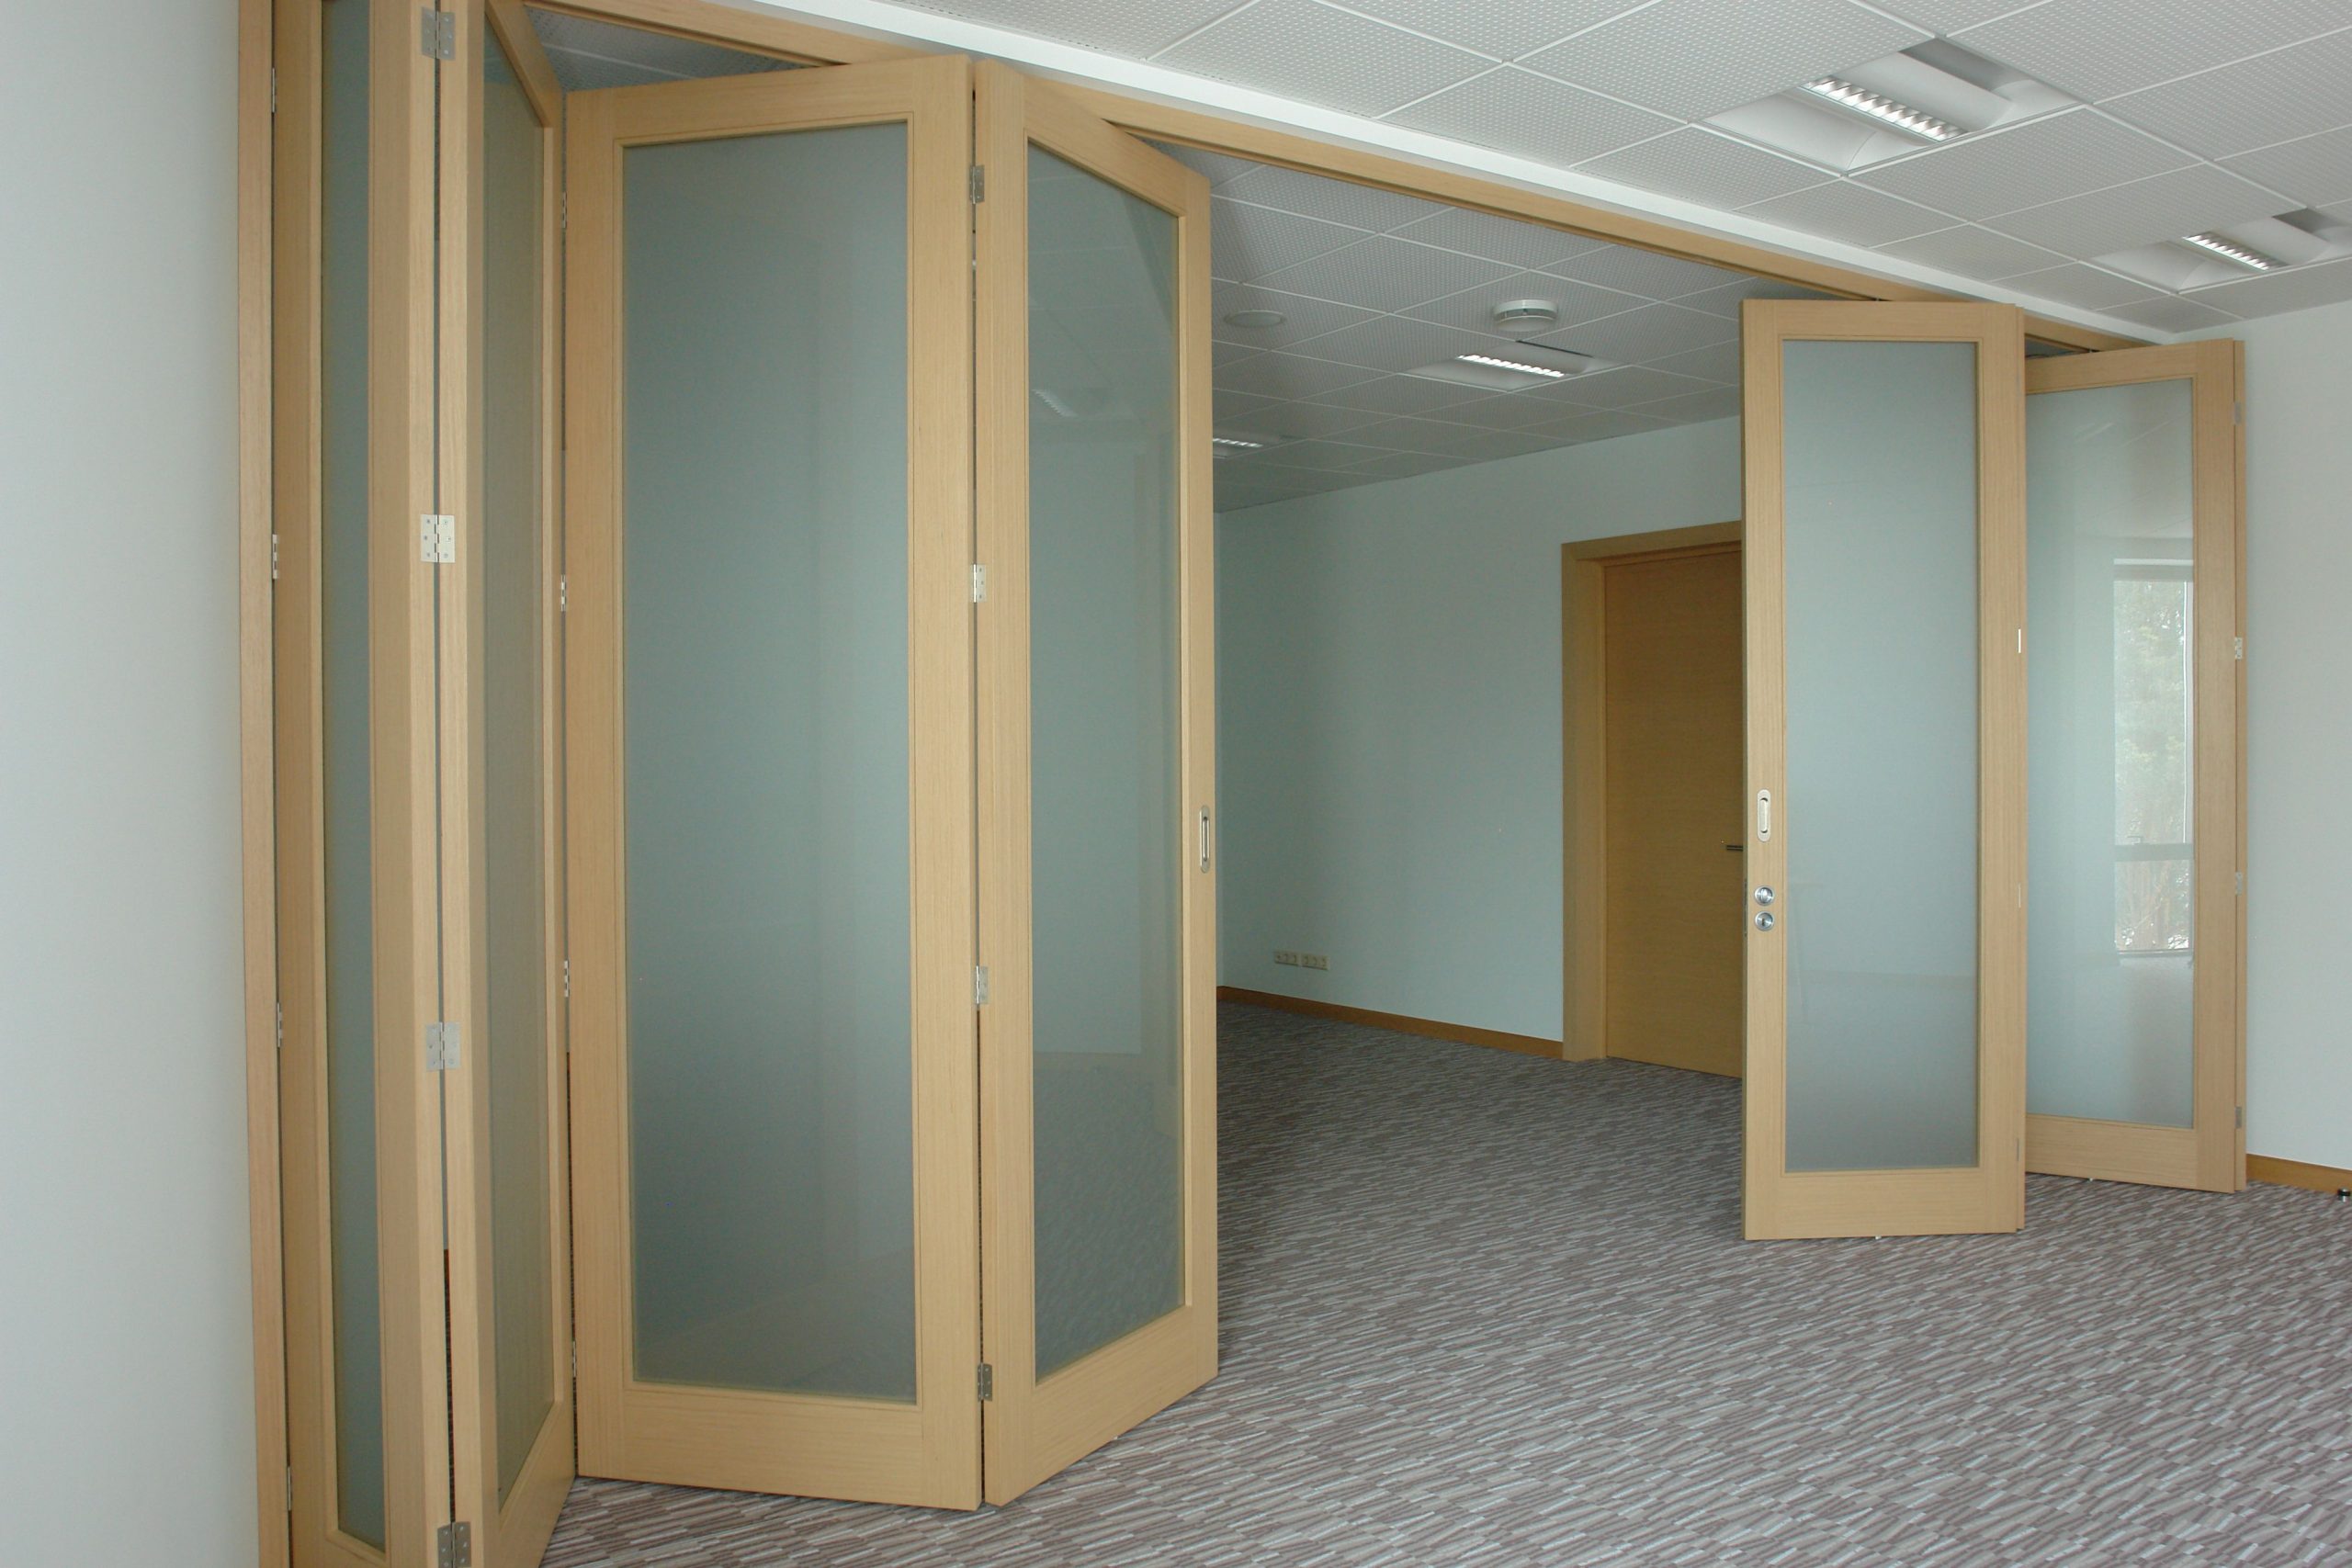 41380e246201f187e2c1d1f4c4639727 scaled - The Benefits Of Folding Partitions